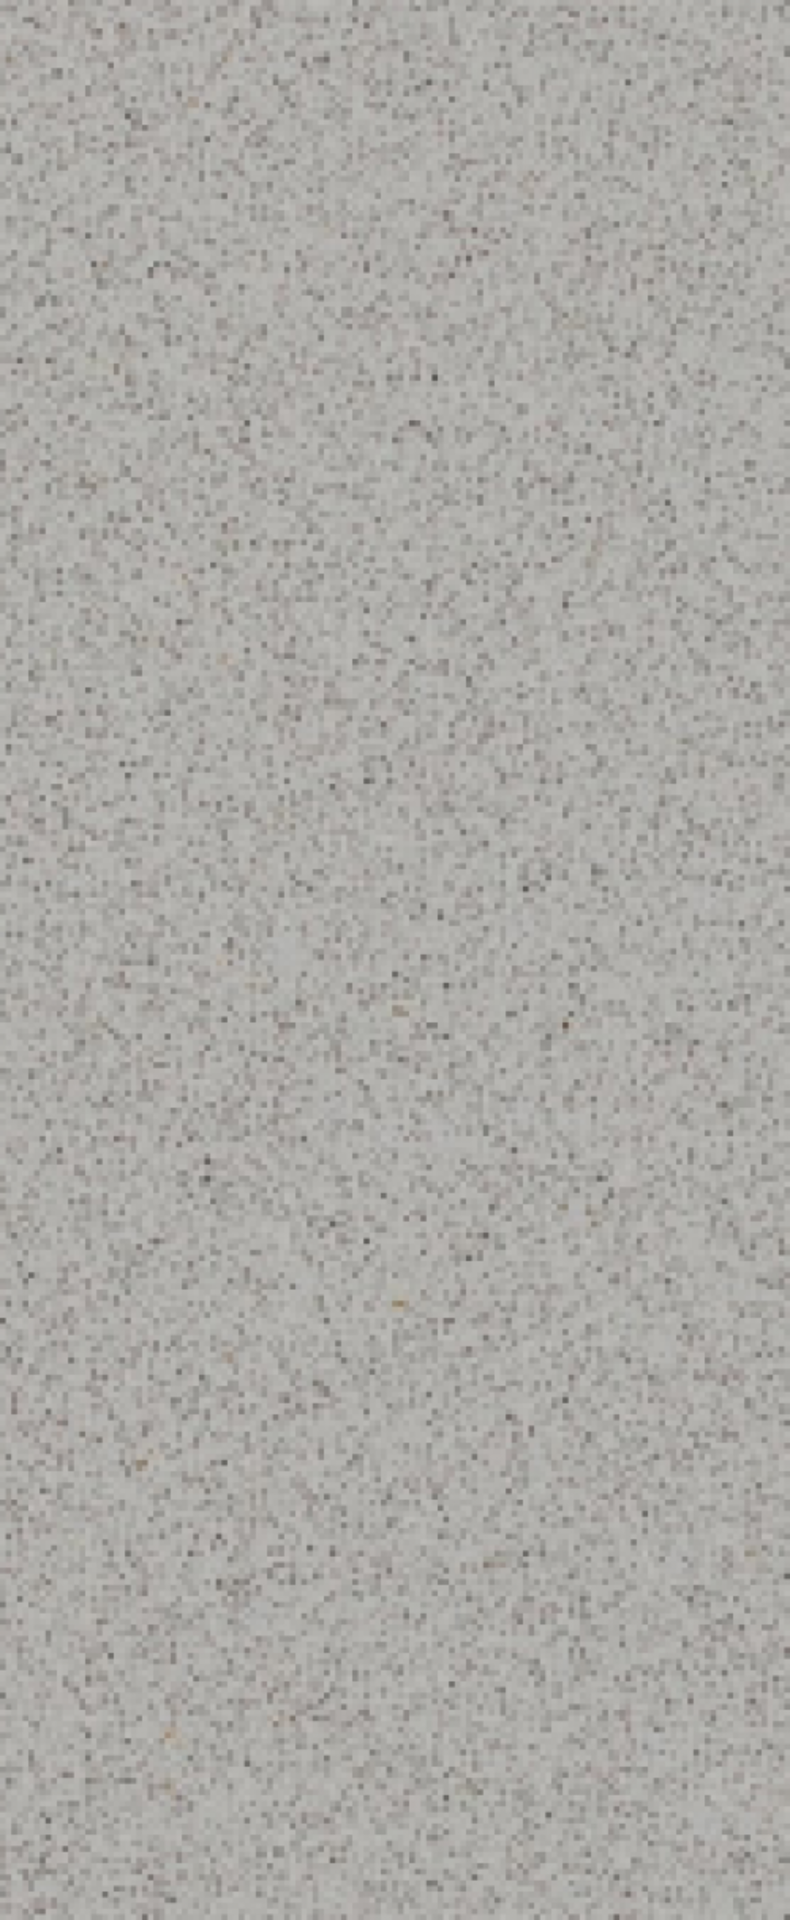 NEW (C187) 600x460mm Worktop Grey Ash Colour. May differ slightly to images. - Image 2 of 2